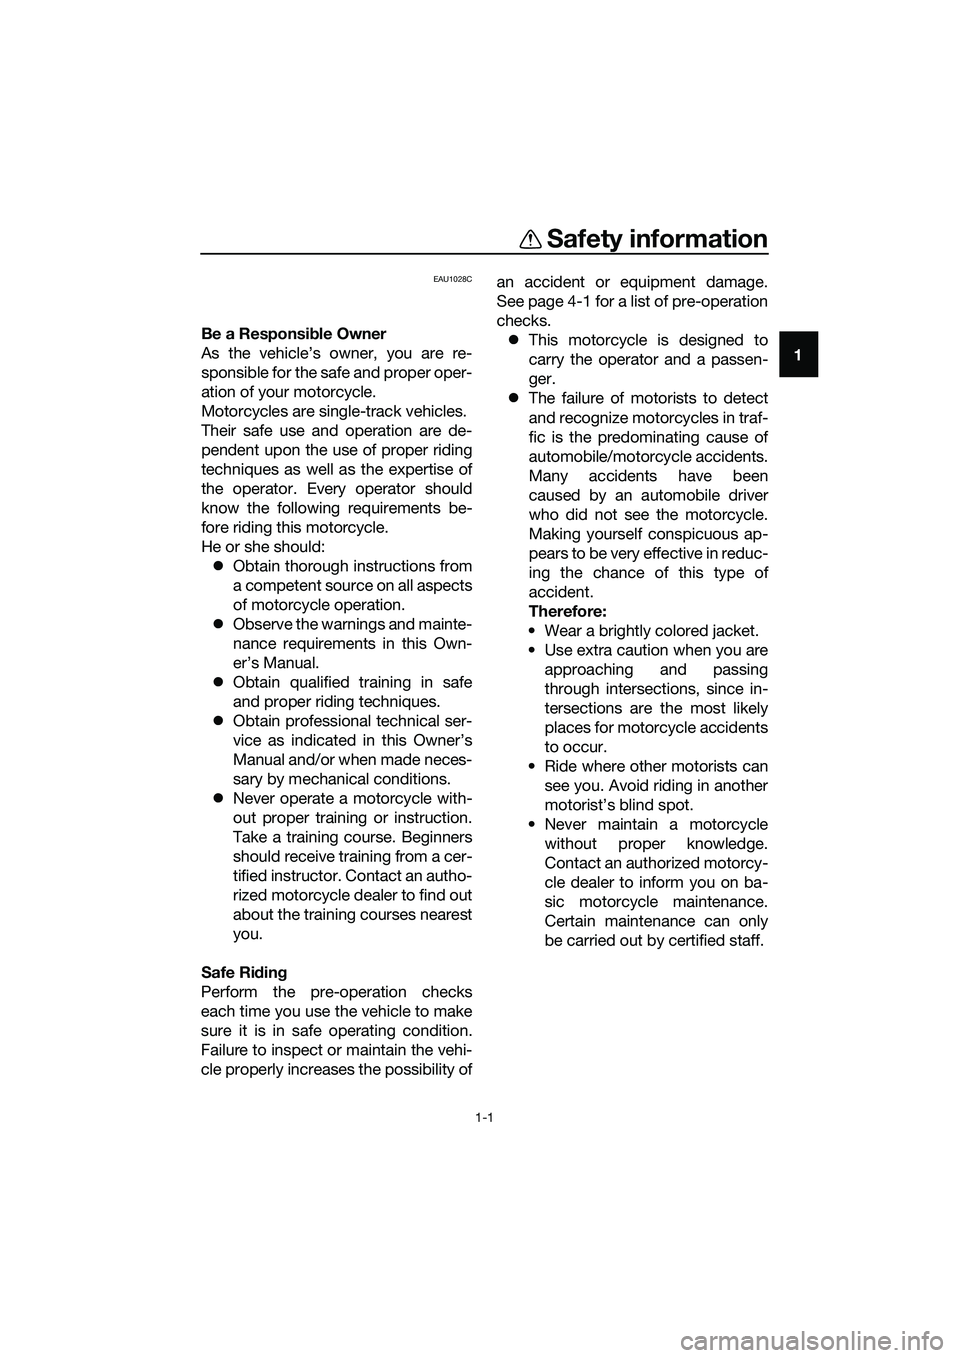 YAMAHA MT-03 2018  Owners Manual 1-1
1
Safety information
EAU1028C
Be a Responsible Owner
As the vehicle’s owner, you are re-
sponsible for the safe and proper oper-
ation of your motorcycle.
Motorcycles are single-track vehicles.
